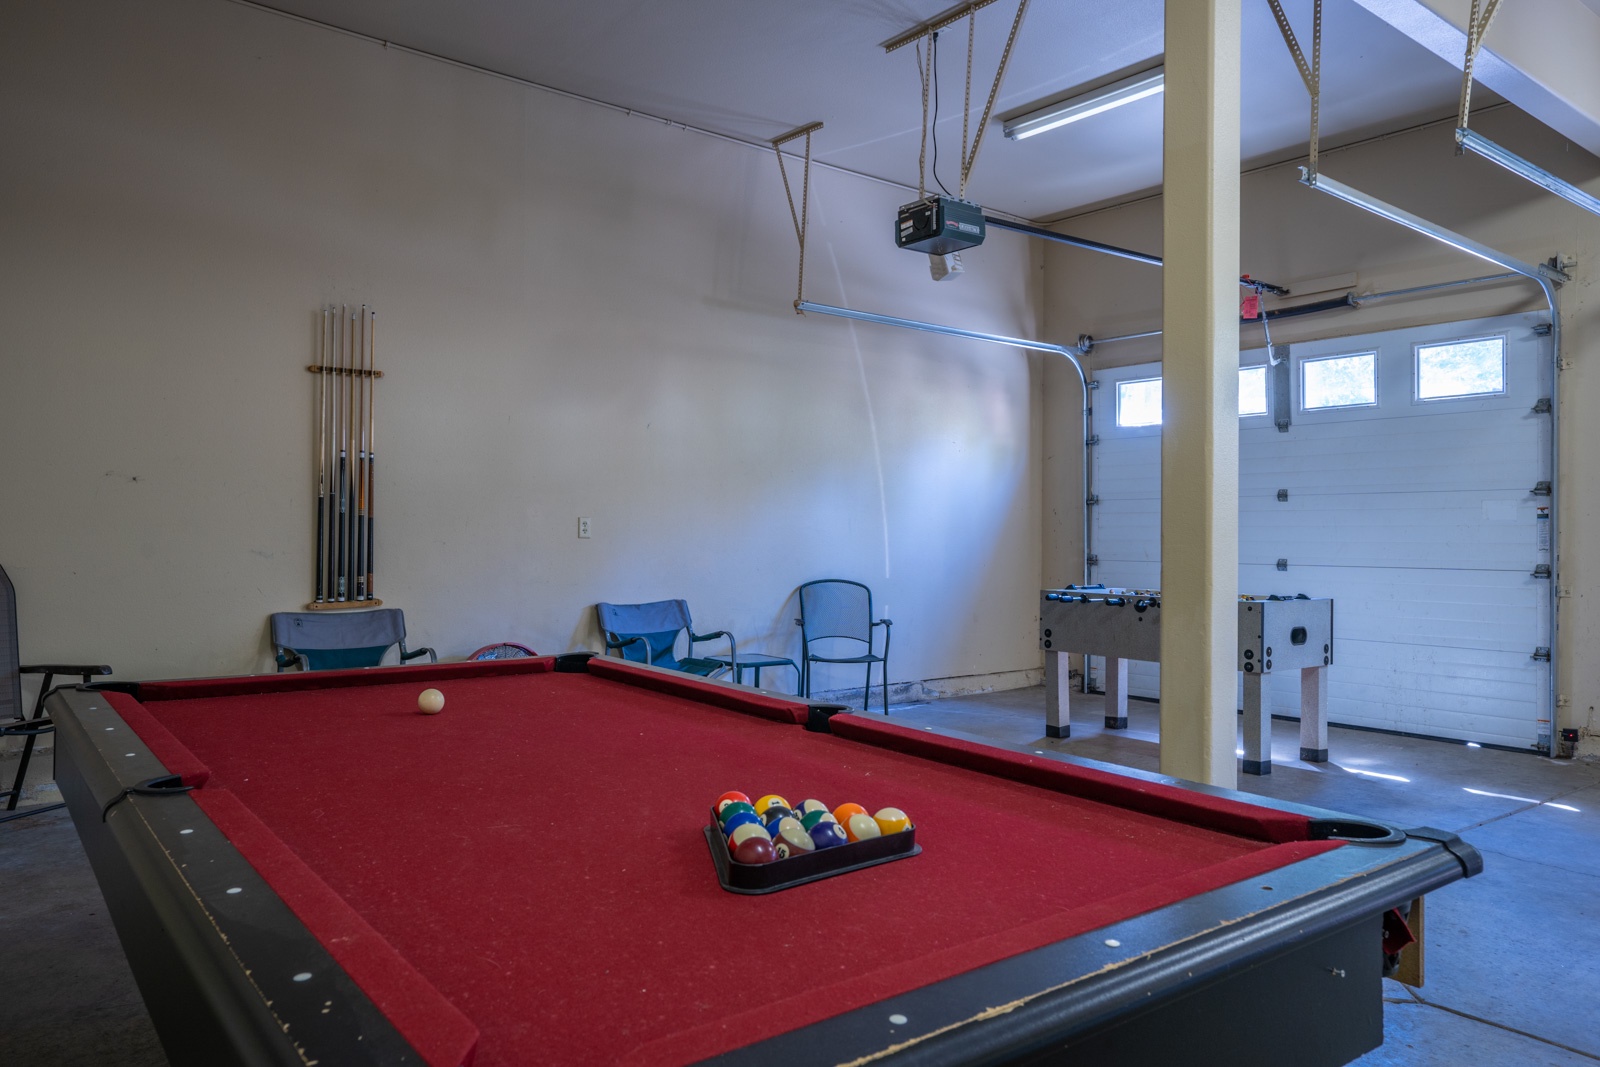 Unleash your competitive side with pool & foosball in the garage game area